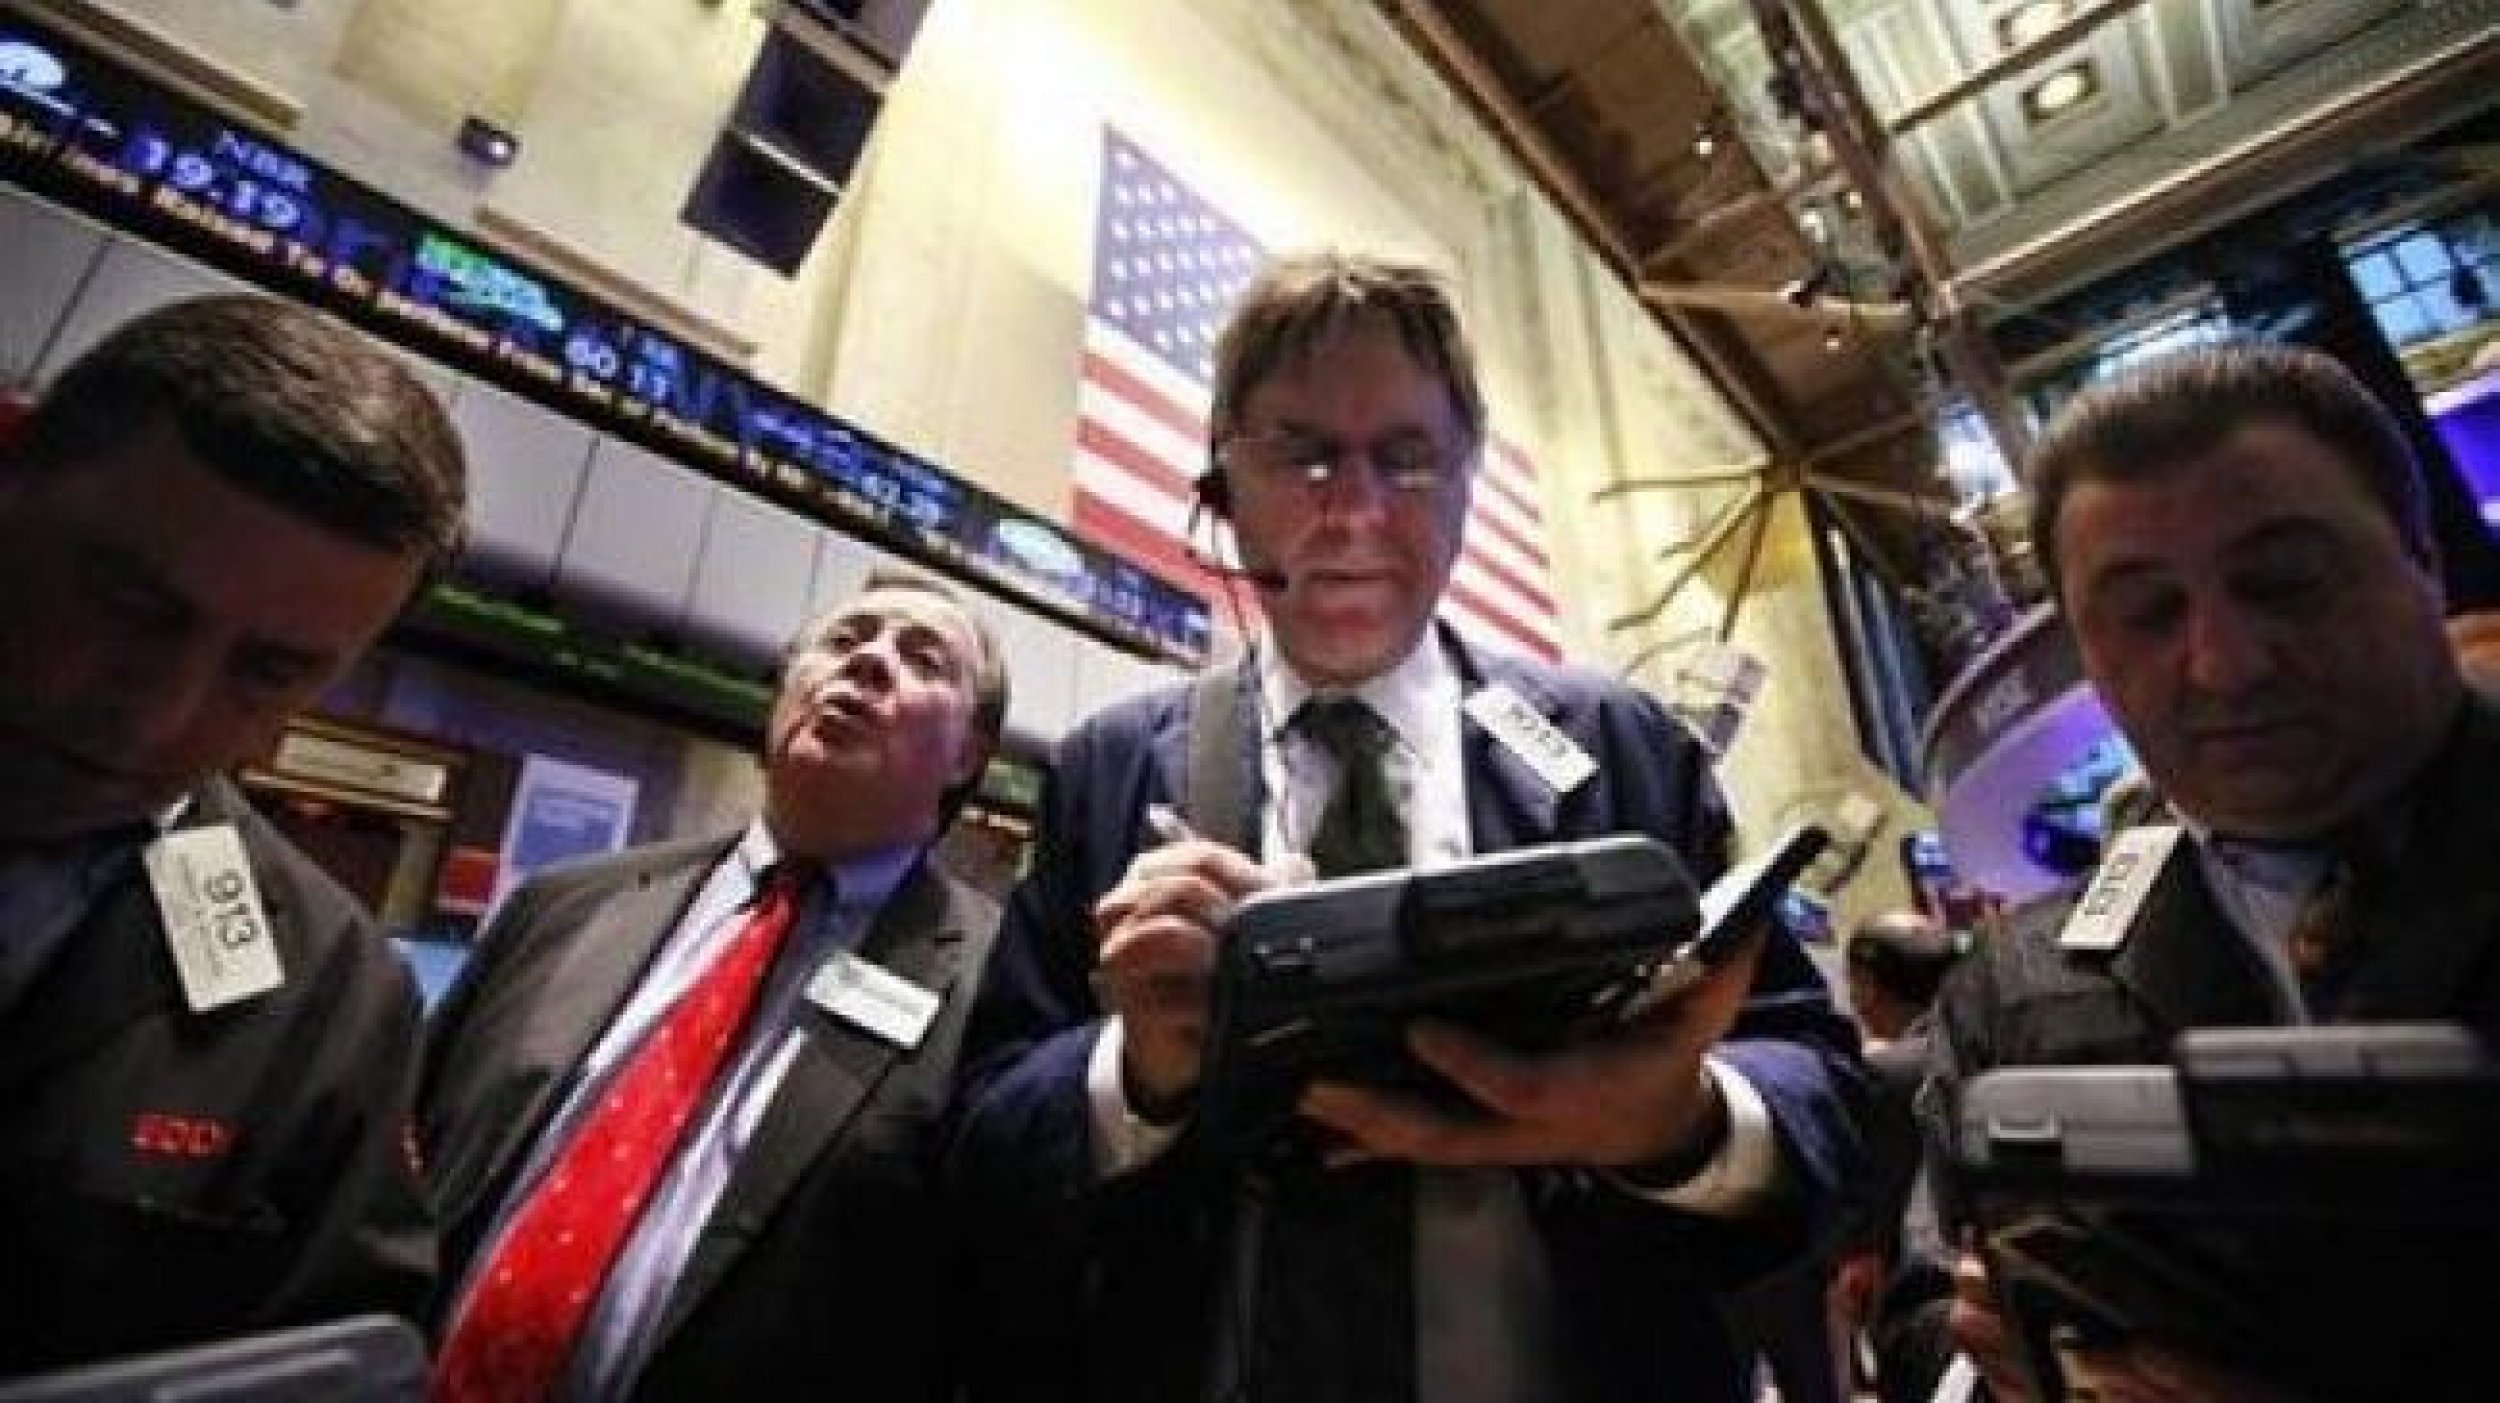 DJIA Stock Futures Dip On Worries Over Greece, China Growth Could Halve If Europe Crisis Worsens